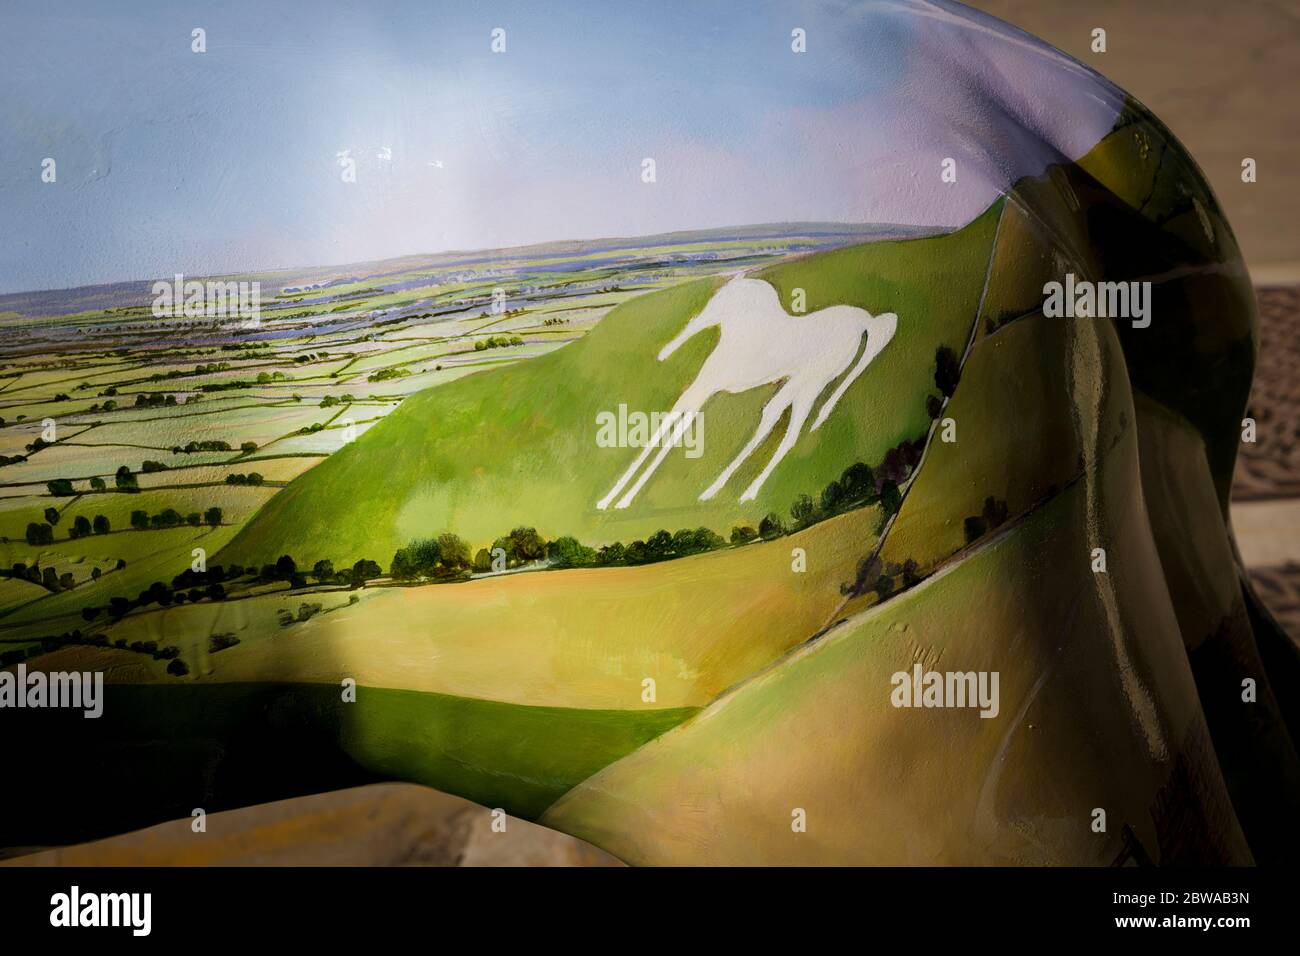 An area of Wiltshire landscape, including a characteristic White Horse cut out of chalkland downs, painted on the flank of an ornamental lion used for urban interest Stock Photo